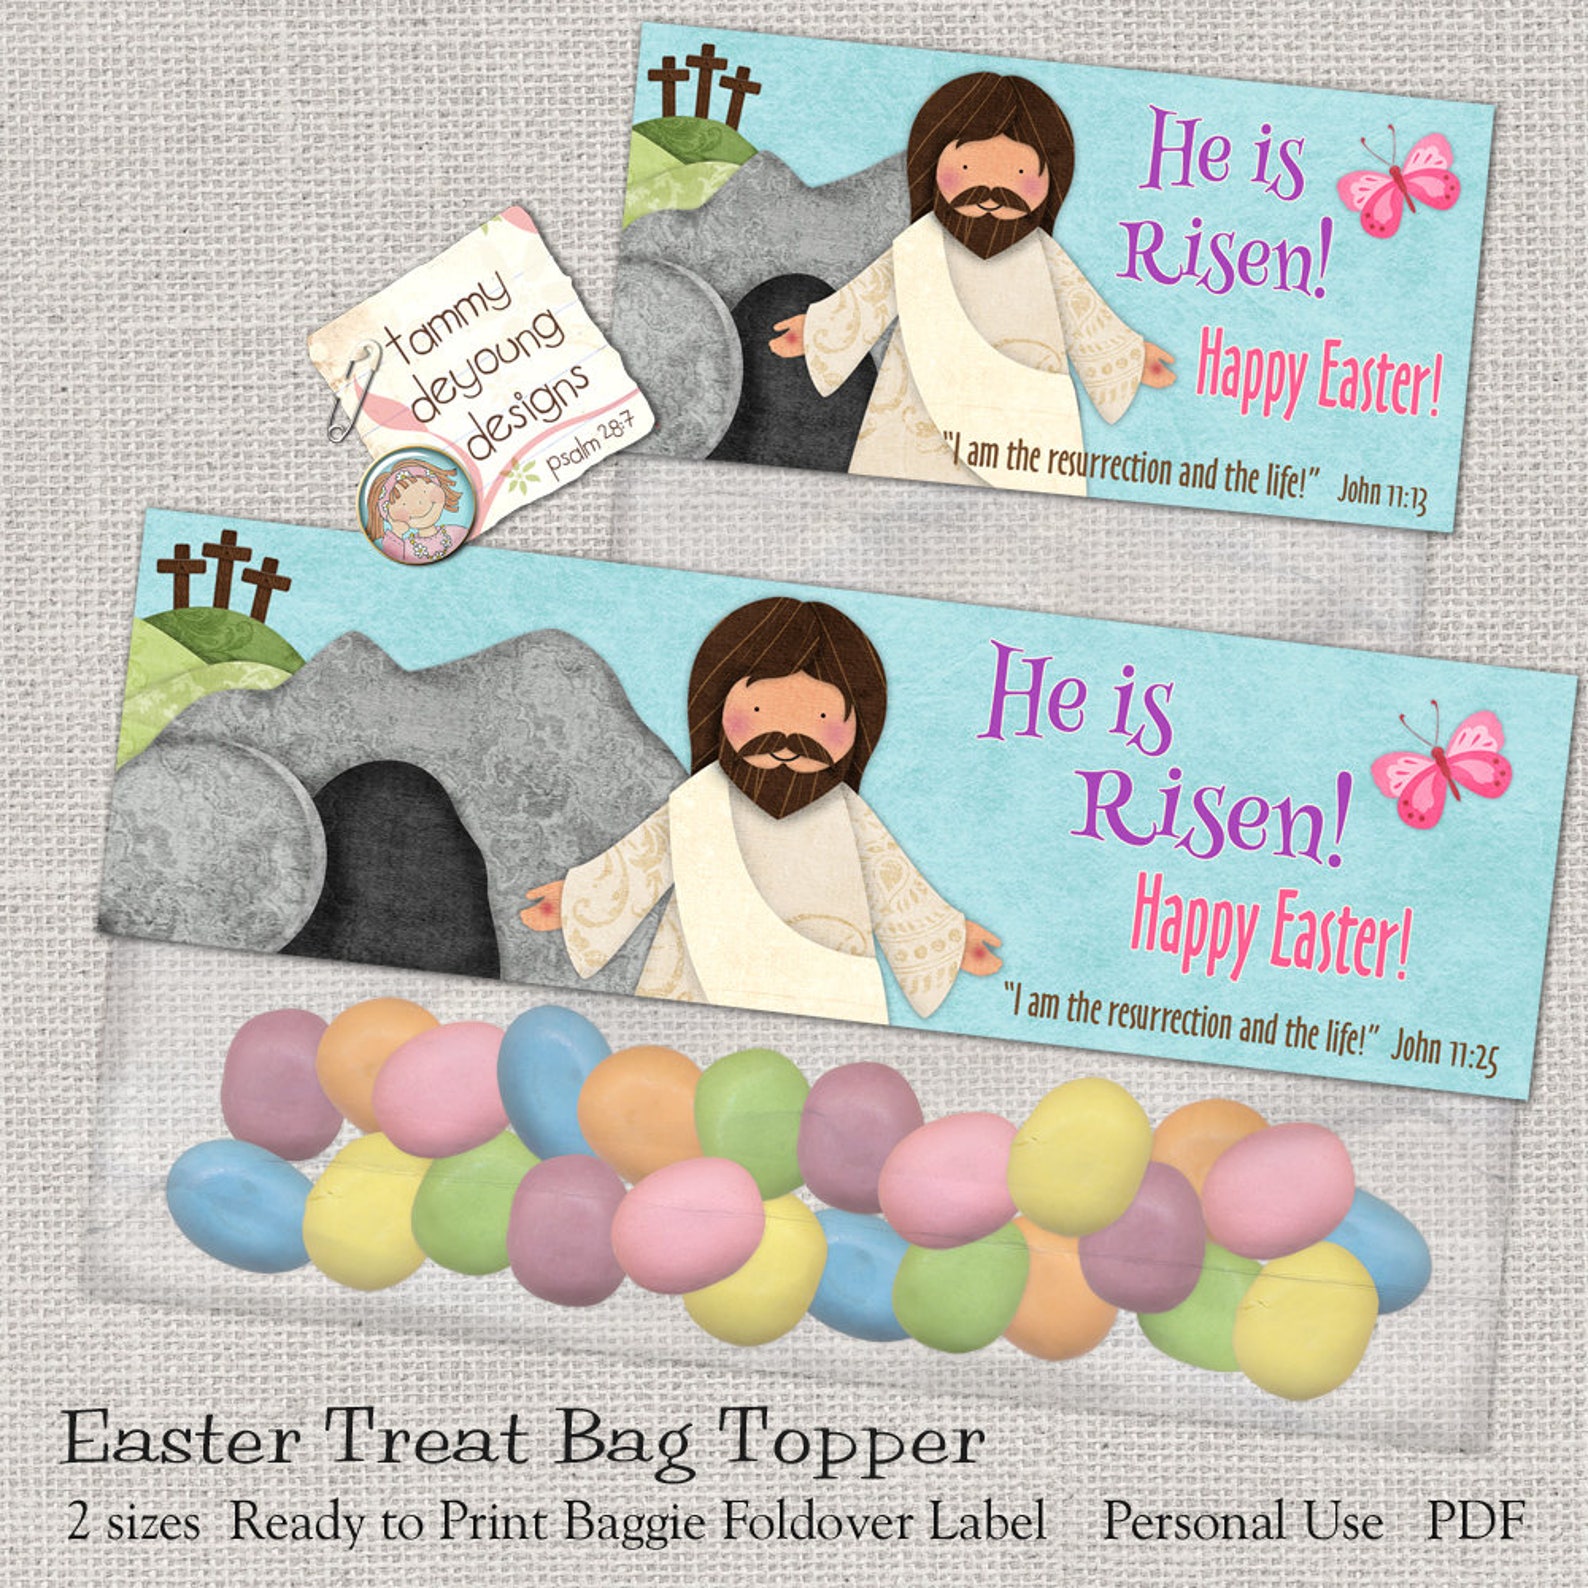 Christian Easter Treat Bag Toppers Printable He Is Risen Etsy